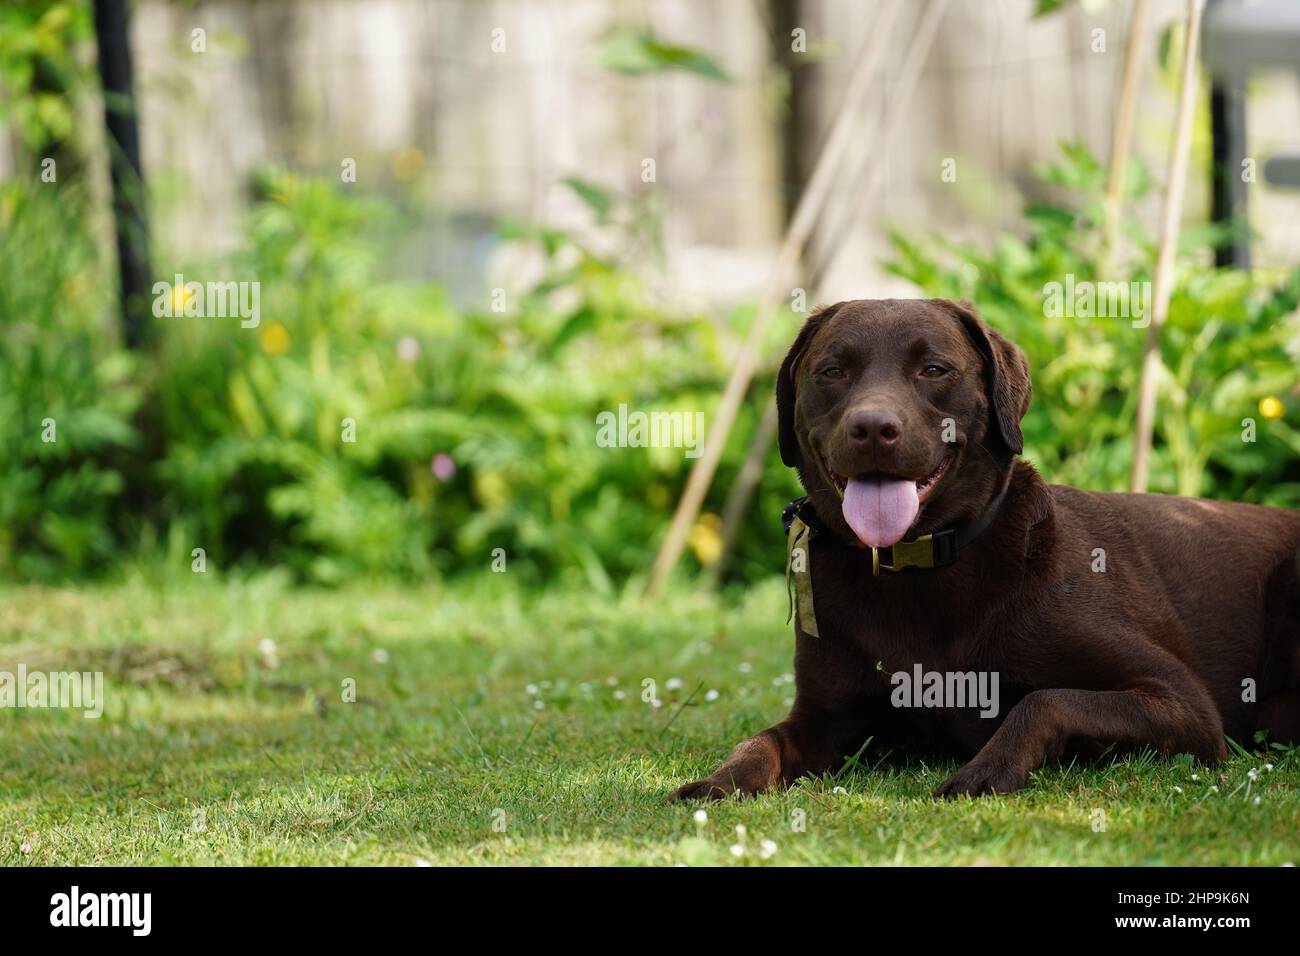 A chocolate labrador sitting in a backyard looking relaxed with it's tounge out Stock Photo